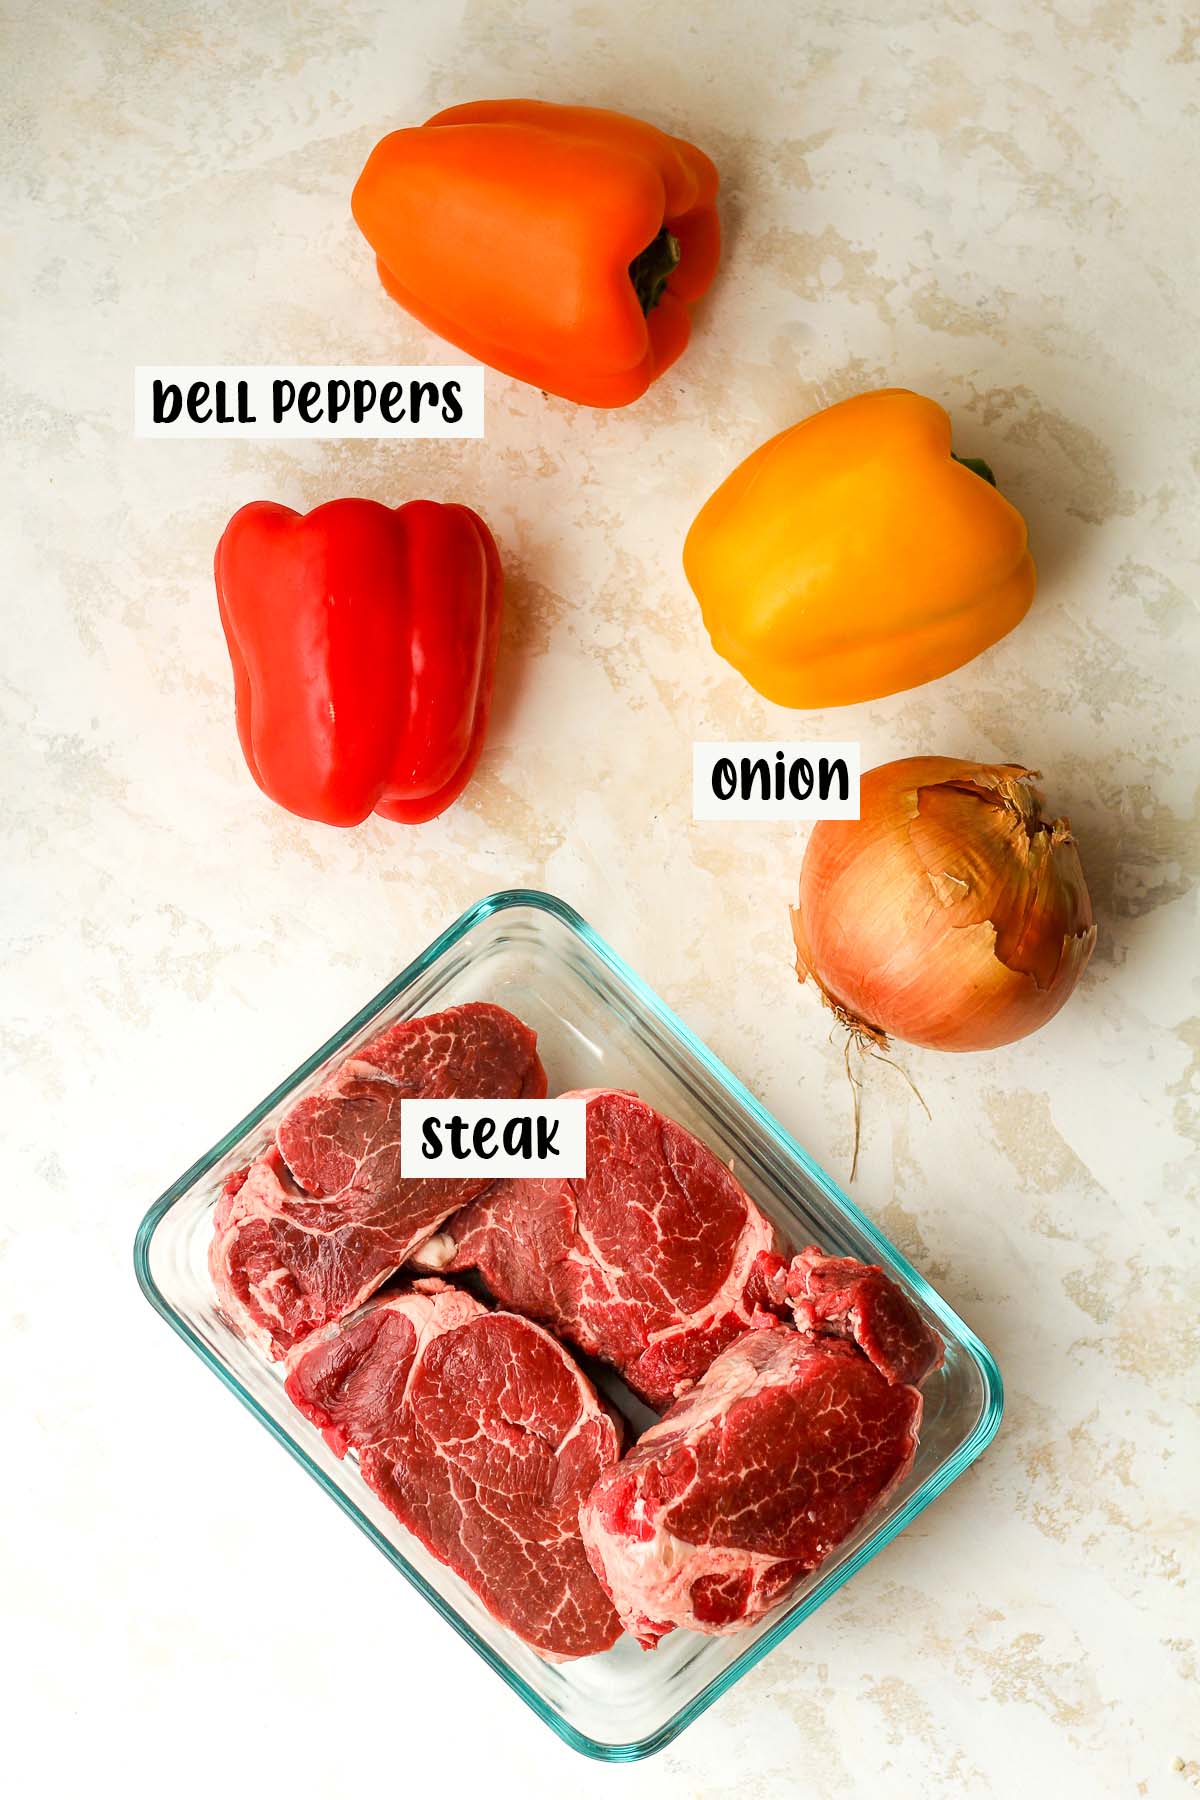 The labeled bell peppers, onions, and steak.